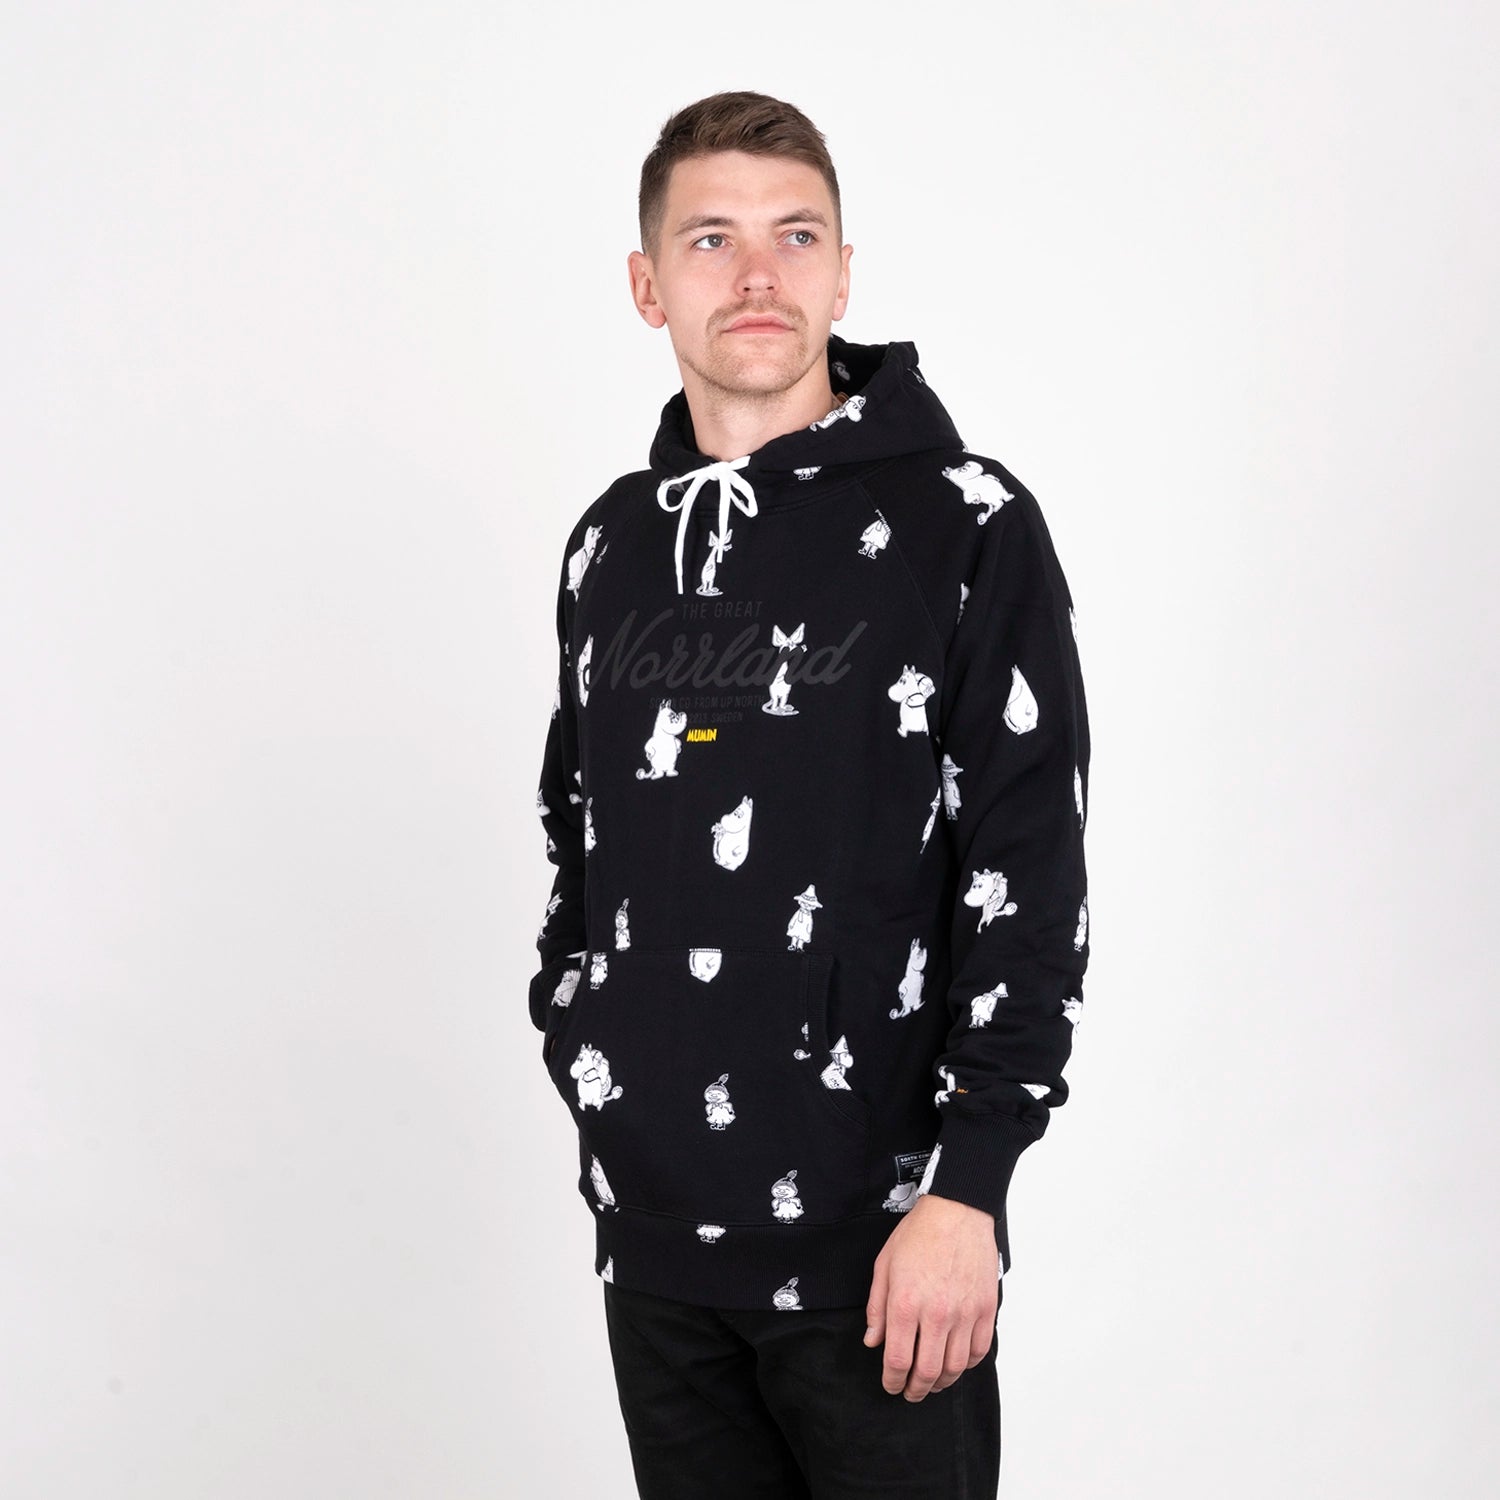 GREAT NORRLAND HOODIE - MUMIN ALL BLACK